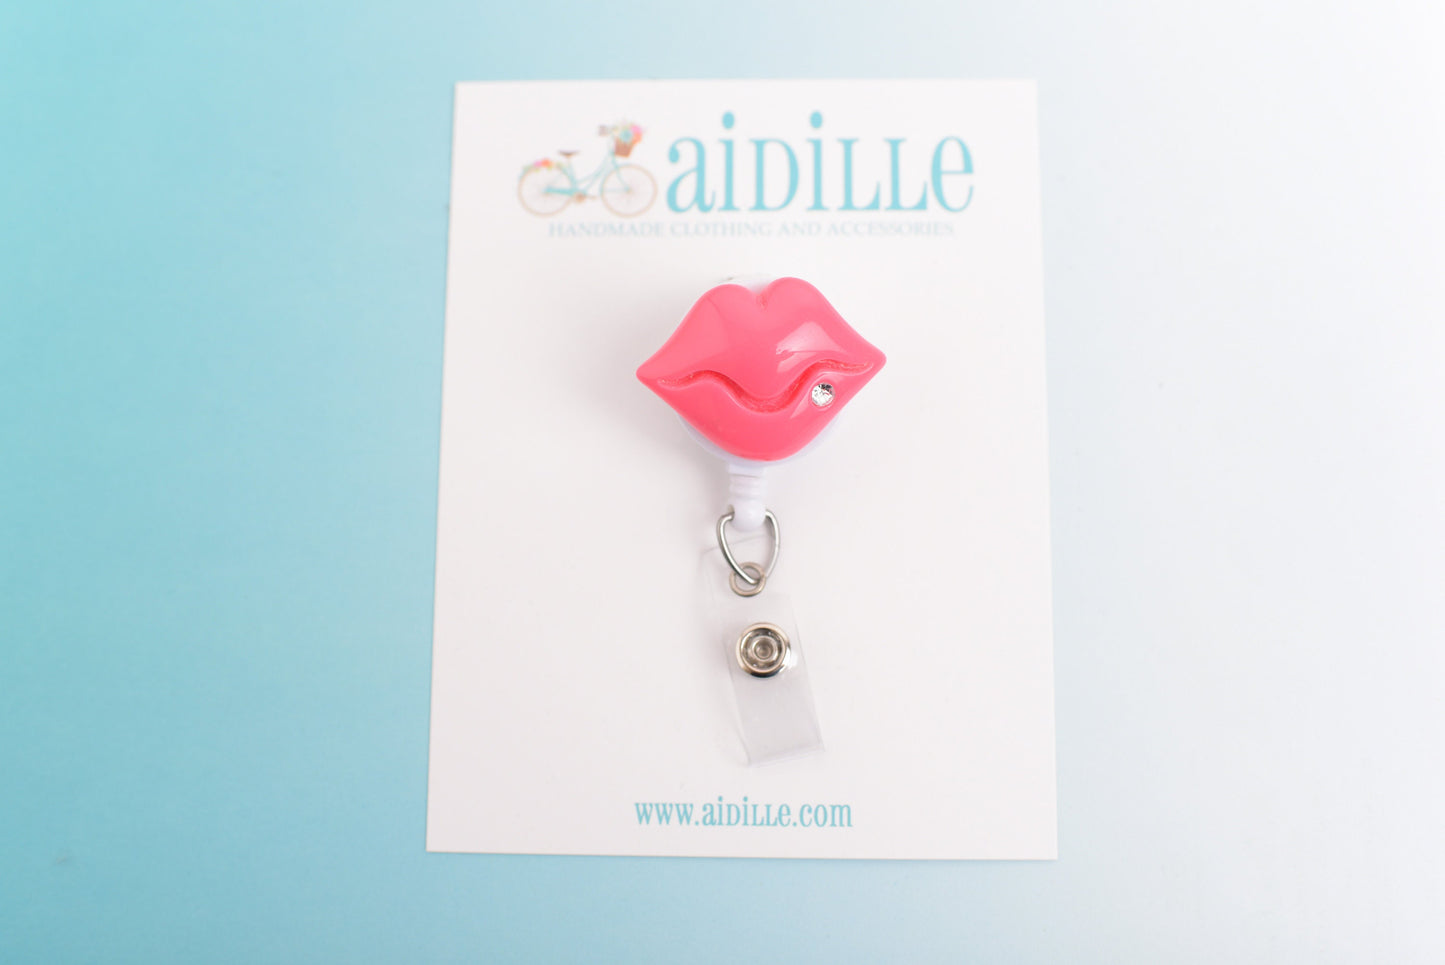 Hot Lips Badge Reel- Red, Hot Pink, or Pink